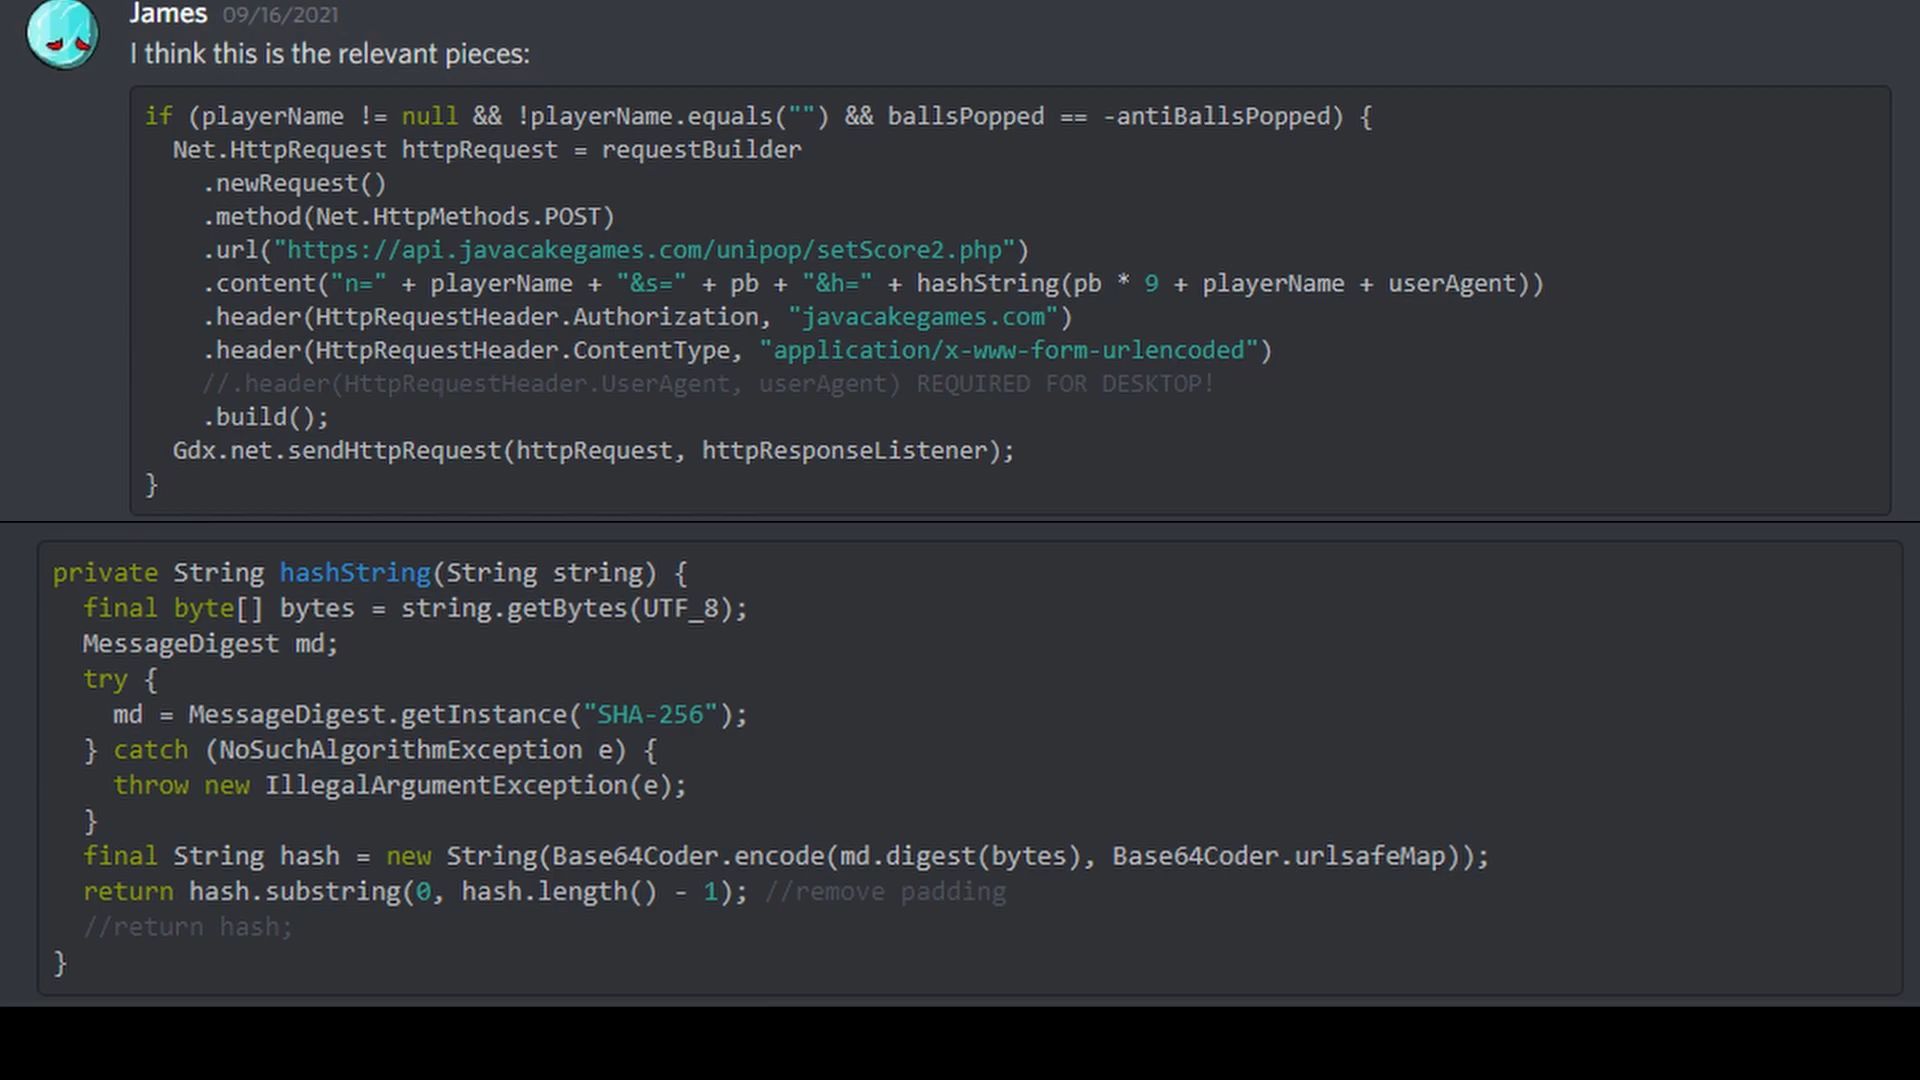 Some of my source code shared in the video WITHOUT MY PERMISSION!